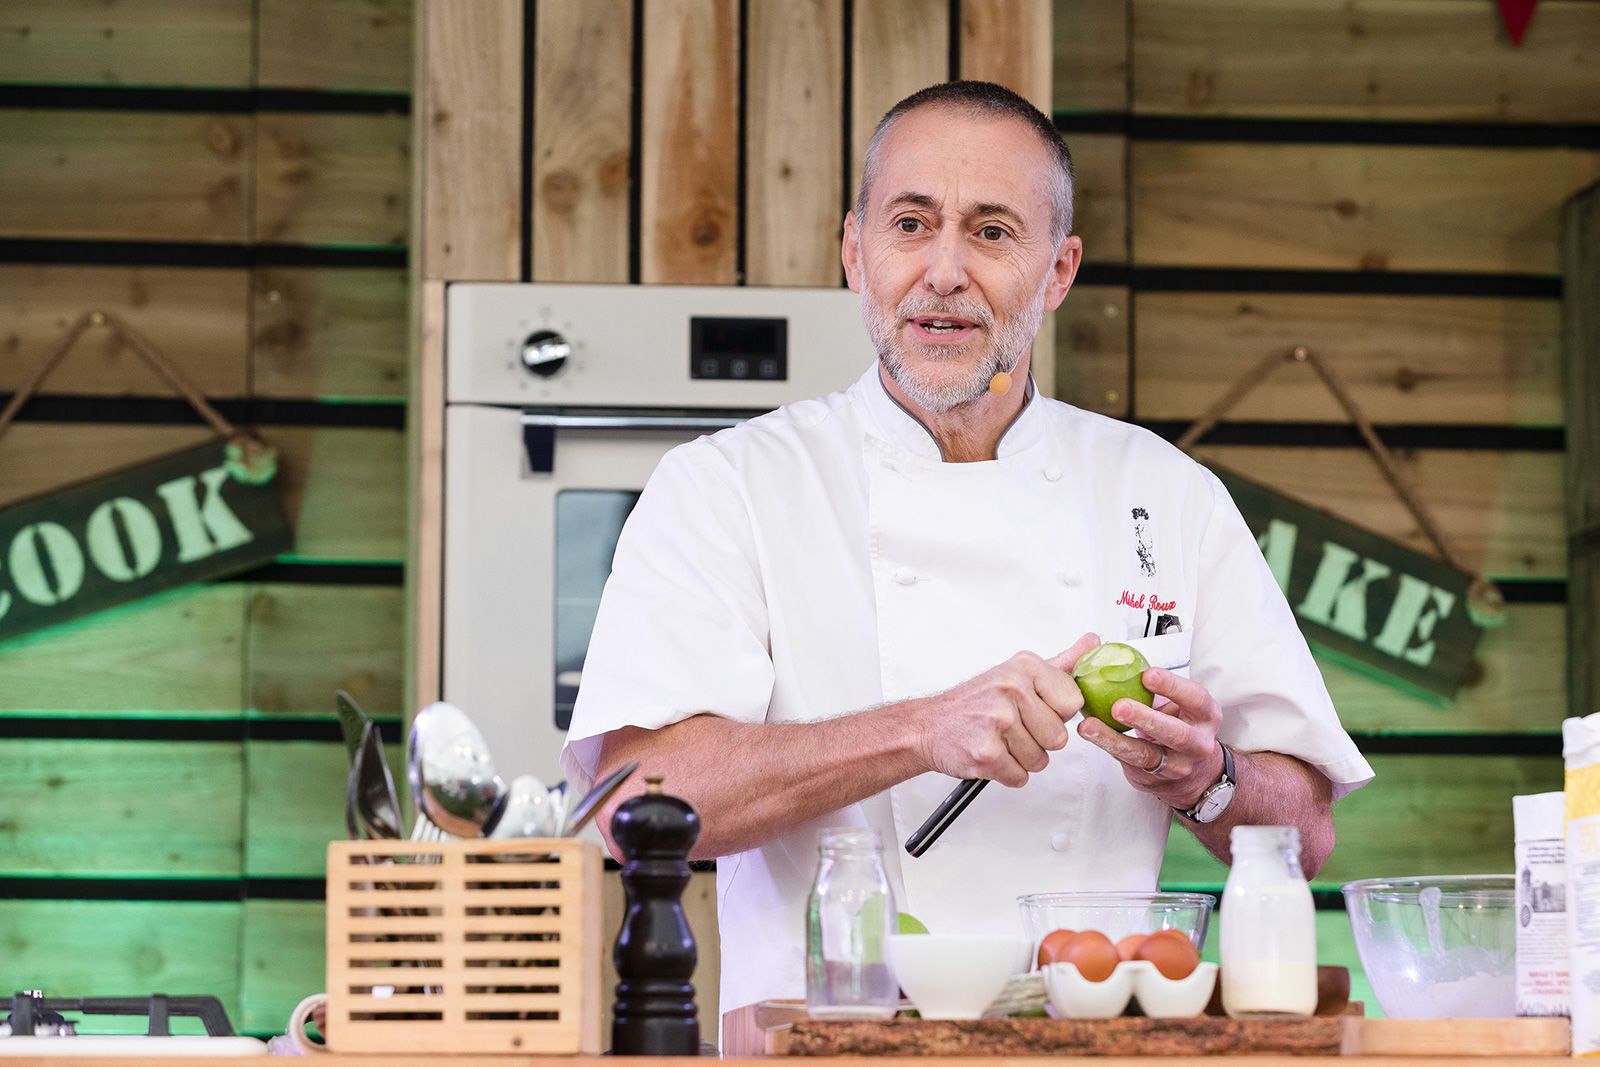 Mandatory Credit: Photo by Vickie Flores/Shutterstock (9070462q)
Michel Roux Jnr
Michel Roux Jr cookery demonstration at The BBC Good Food's Feast, London, UK - 22 Sep 2017